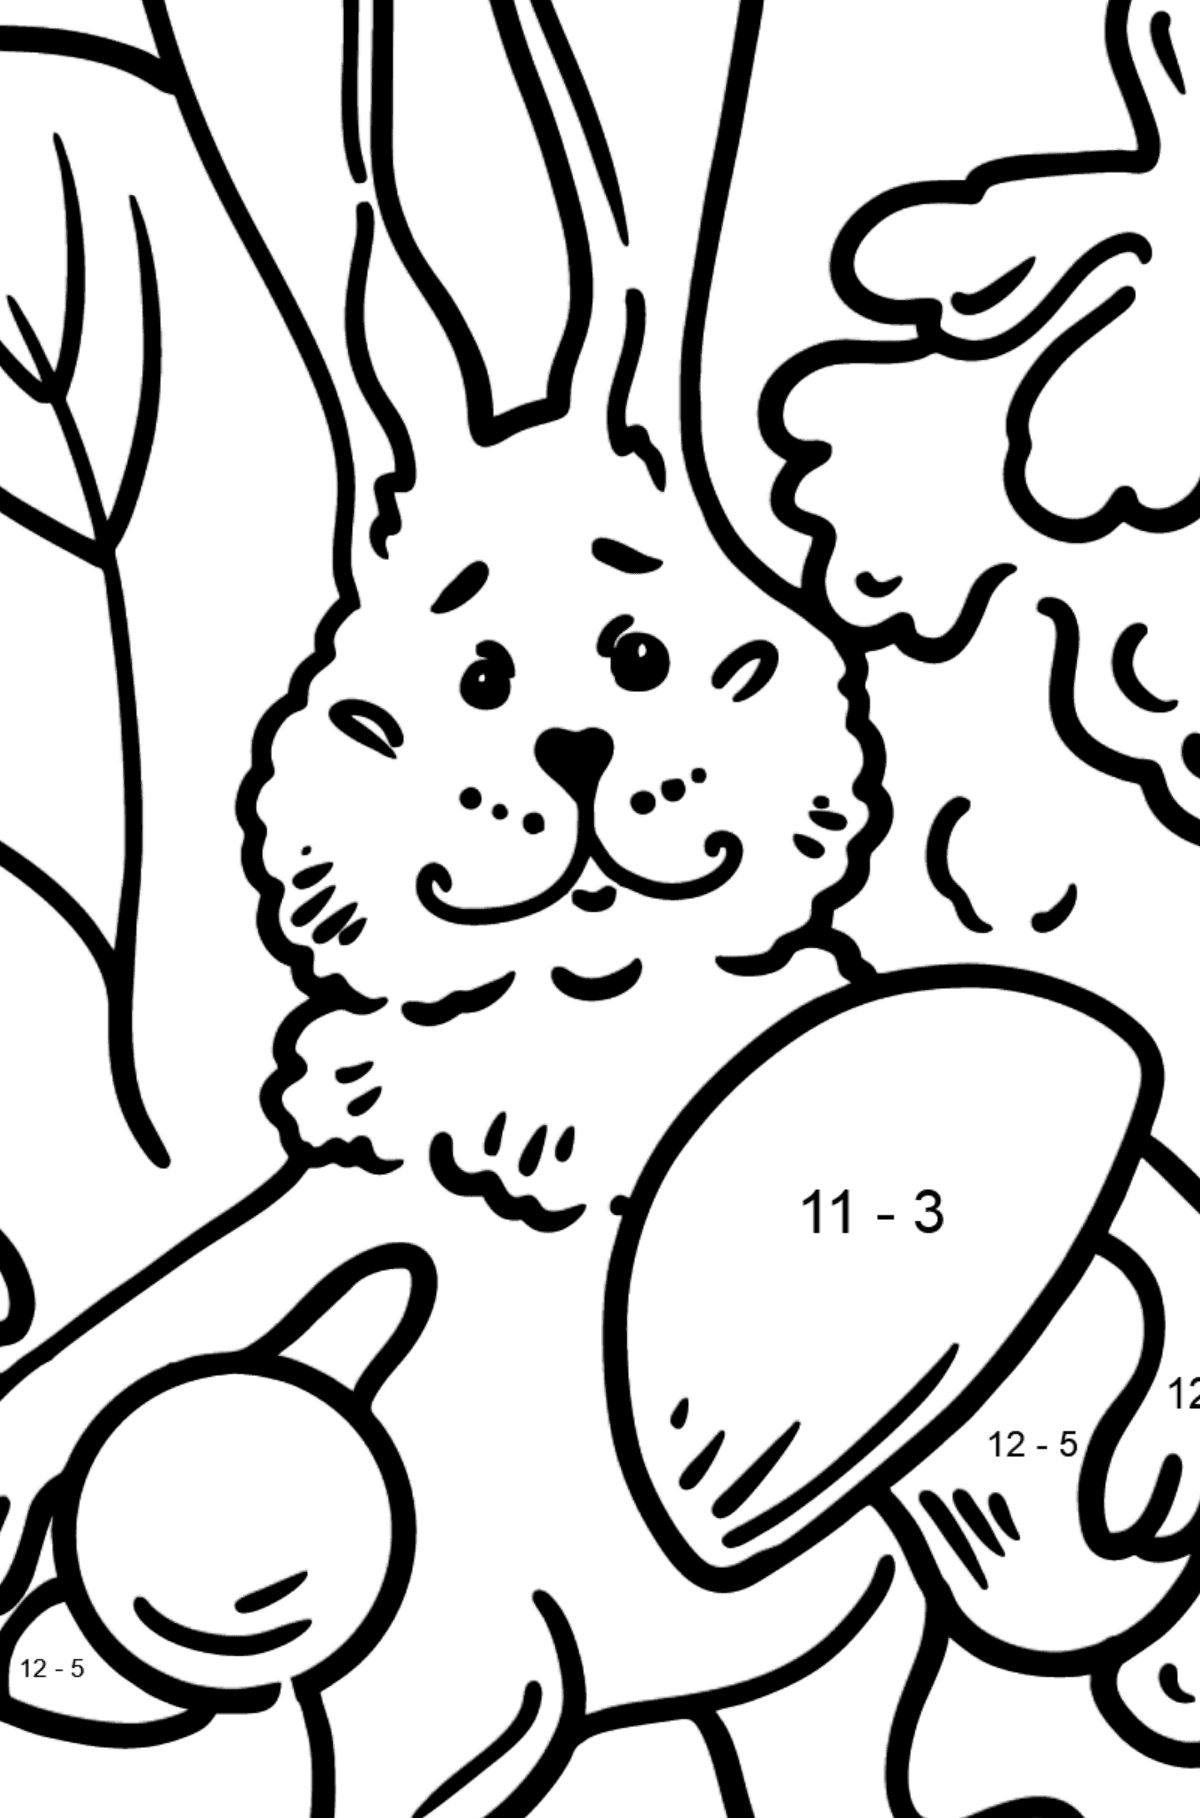 Bunny in the Forest coloring page - Math Coloring - Subtraction for Kids